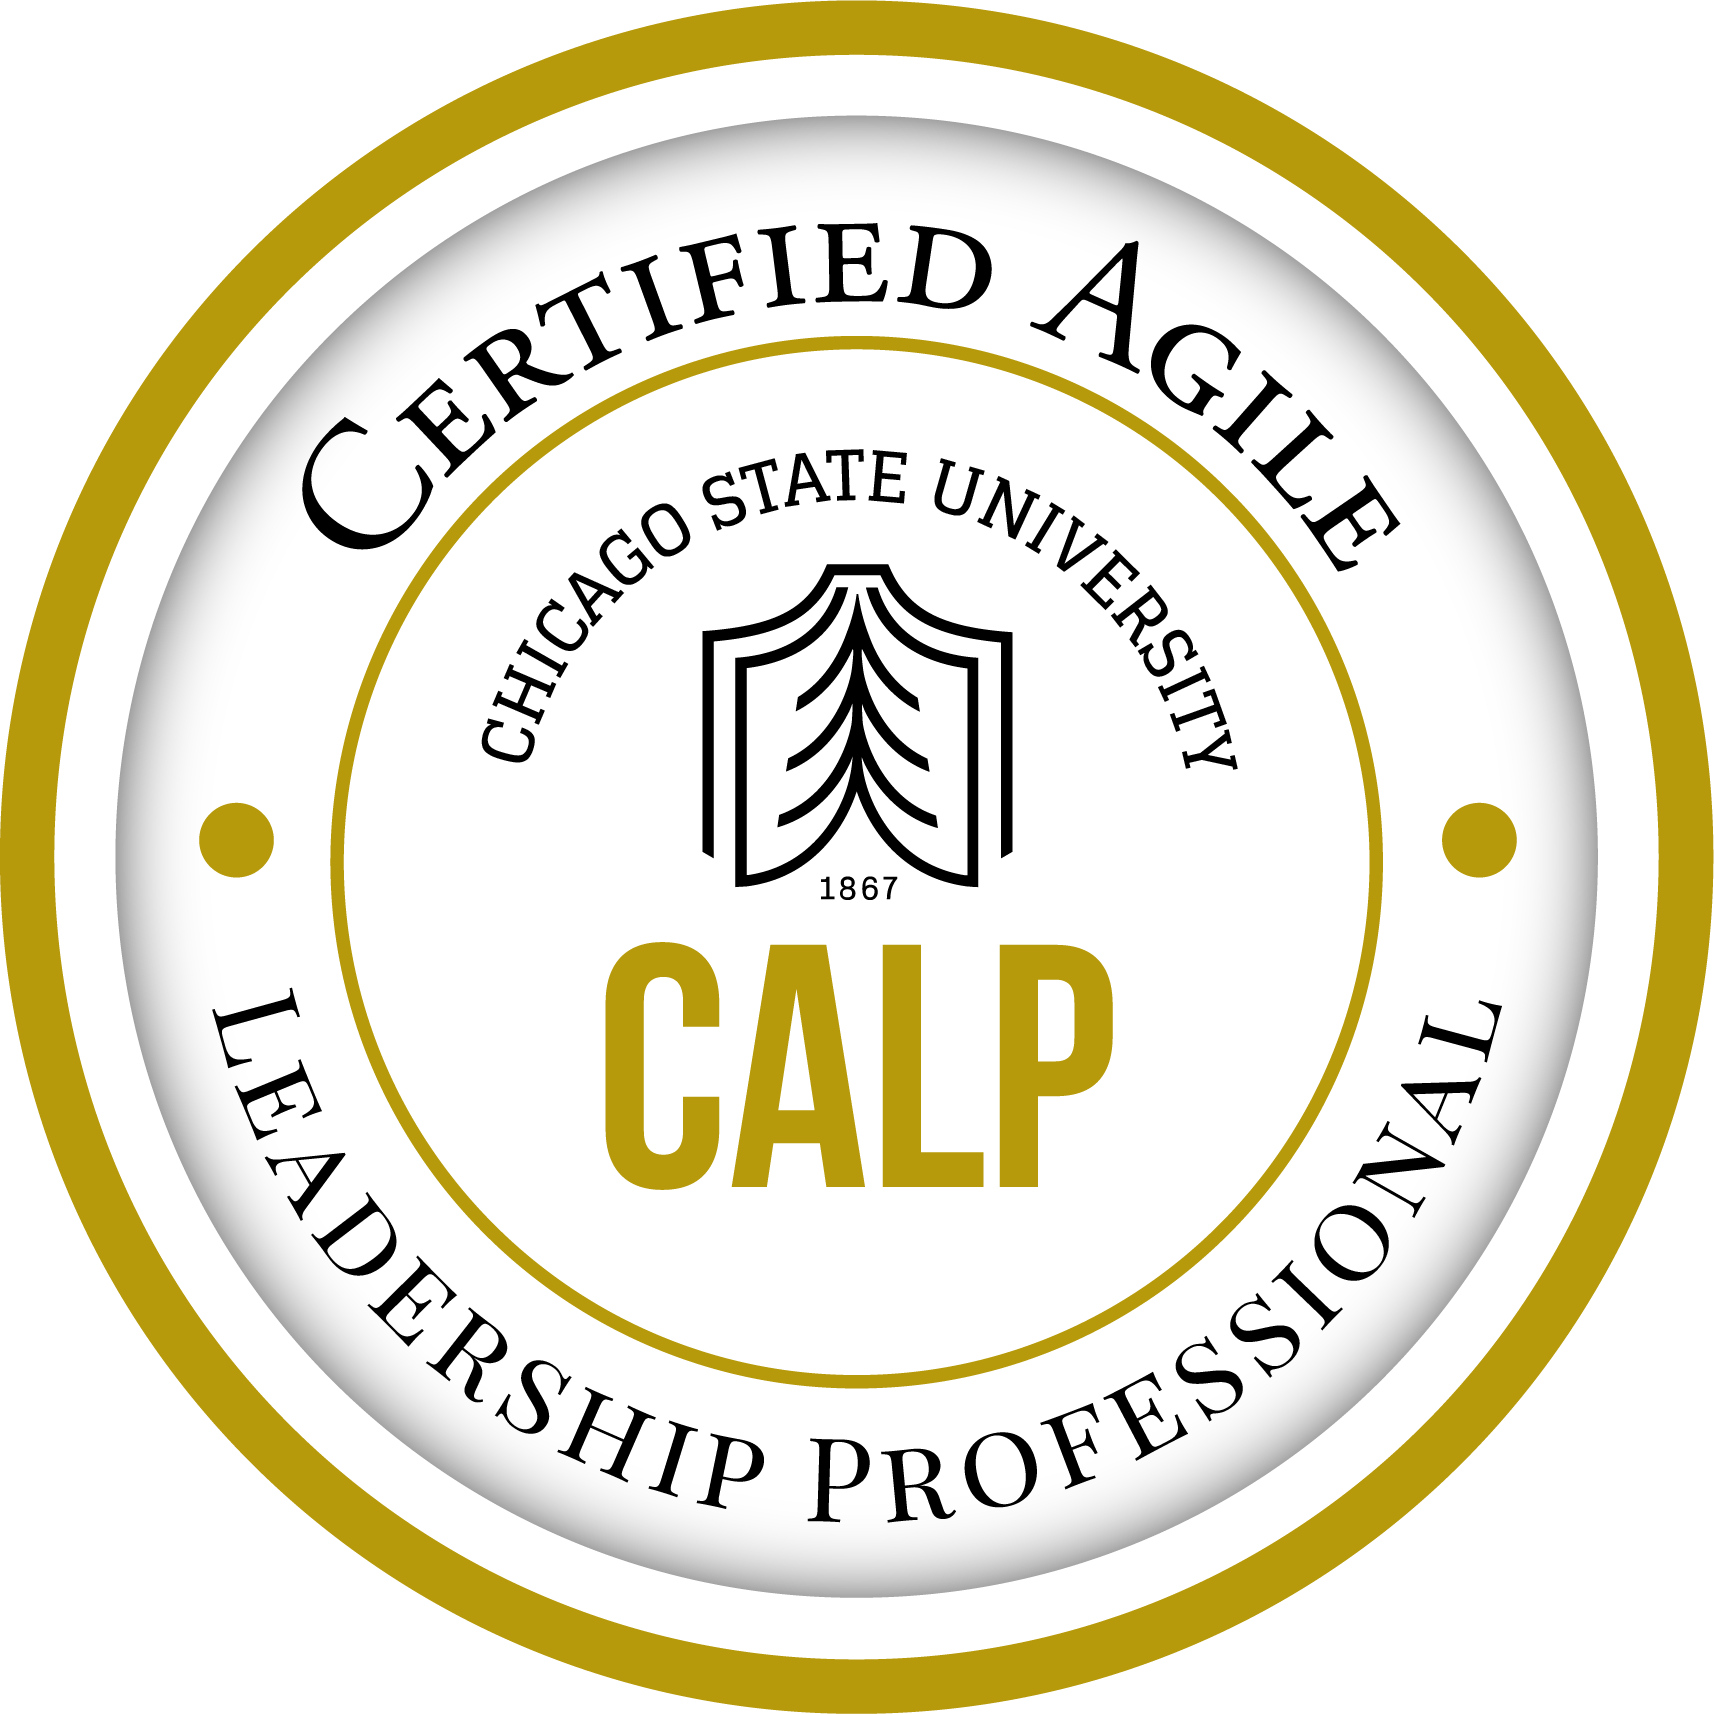 Certified Enterprise Agile Coach (CEAC) from Chicago State University 